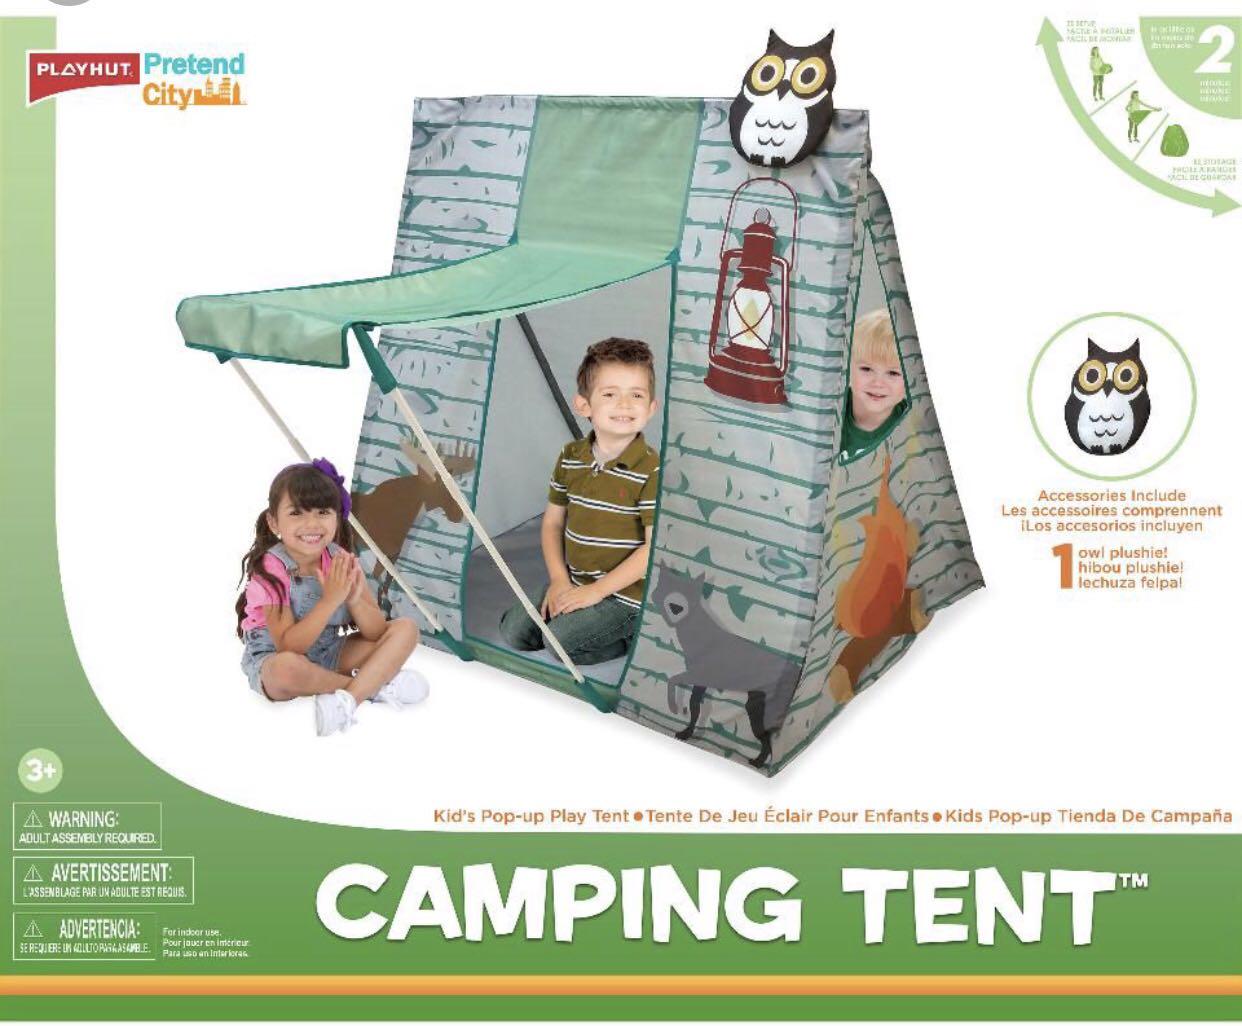 Bn Playhut Pretend City Camping Play Tent Toys Games Others On Carousell